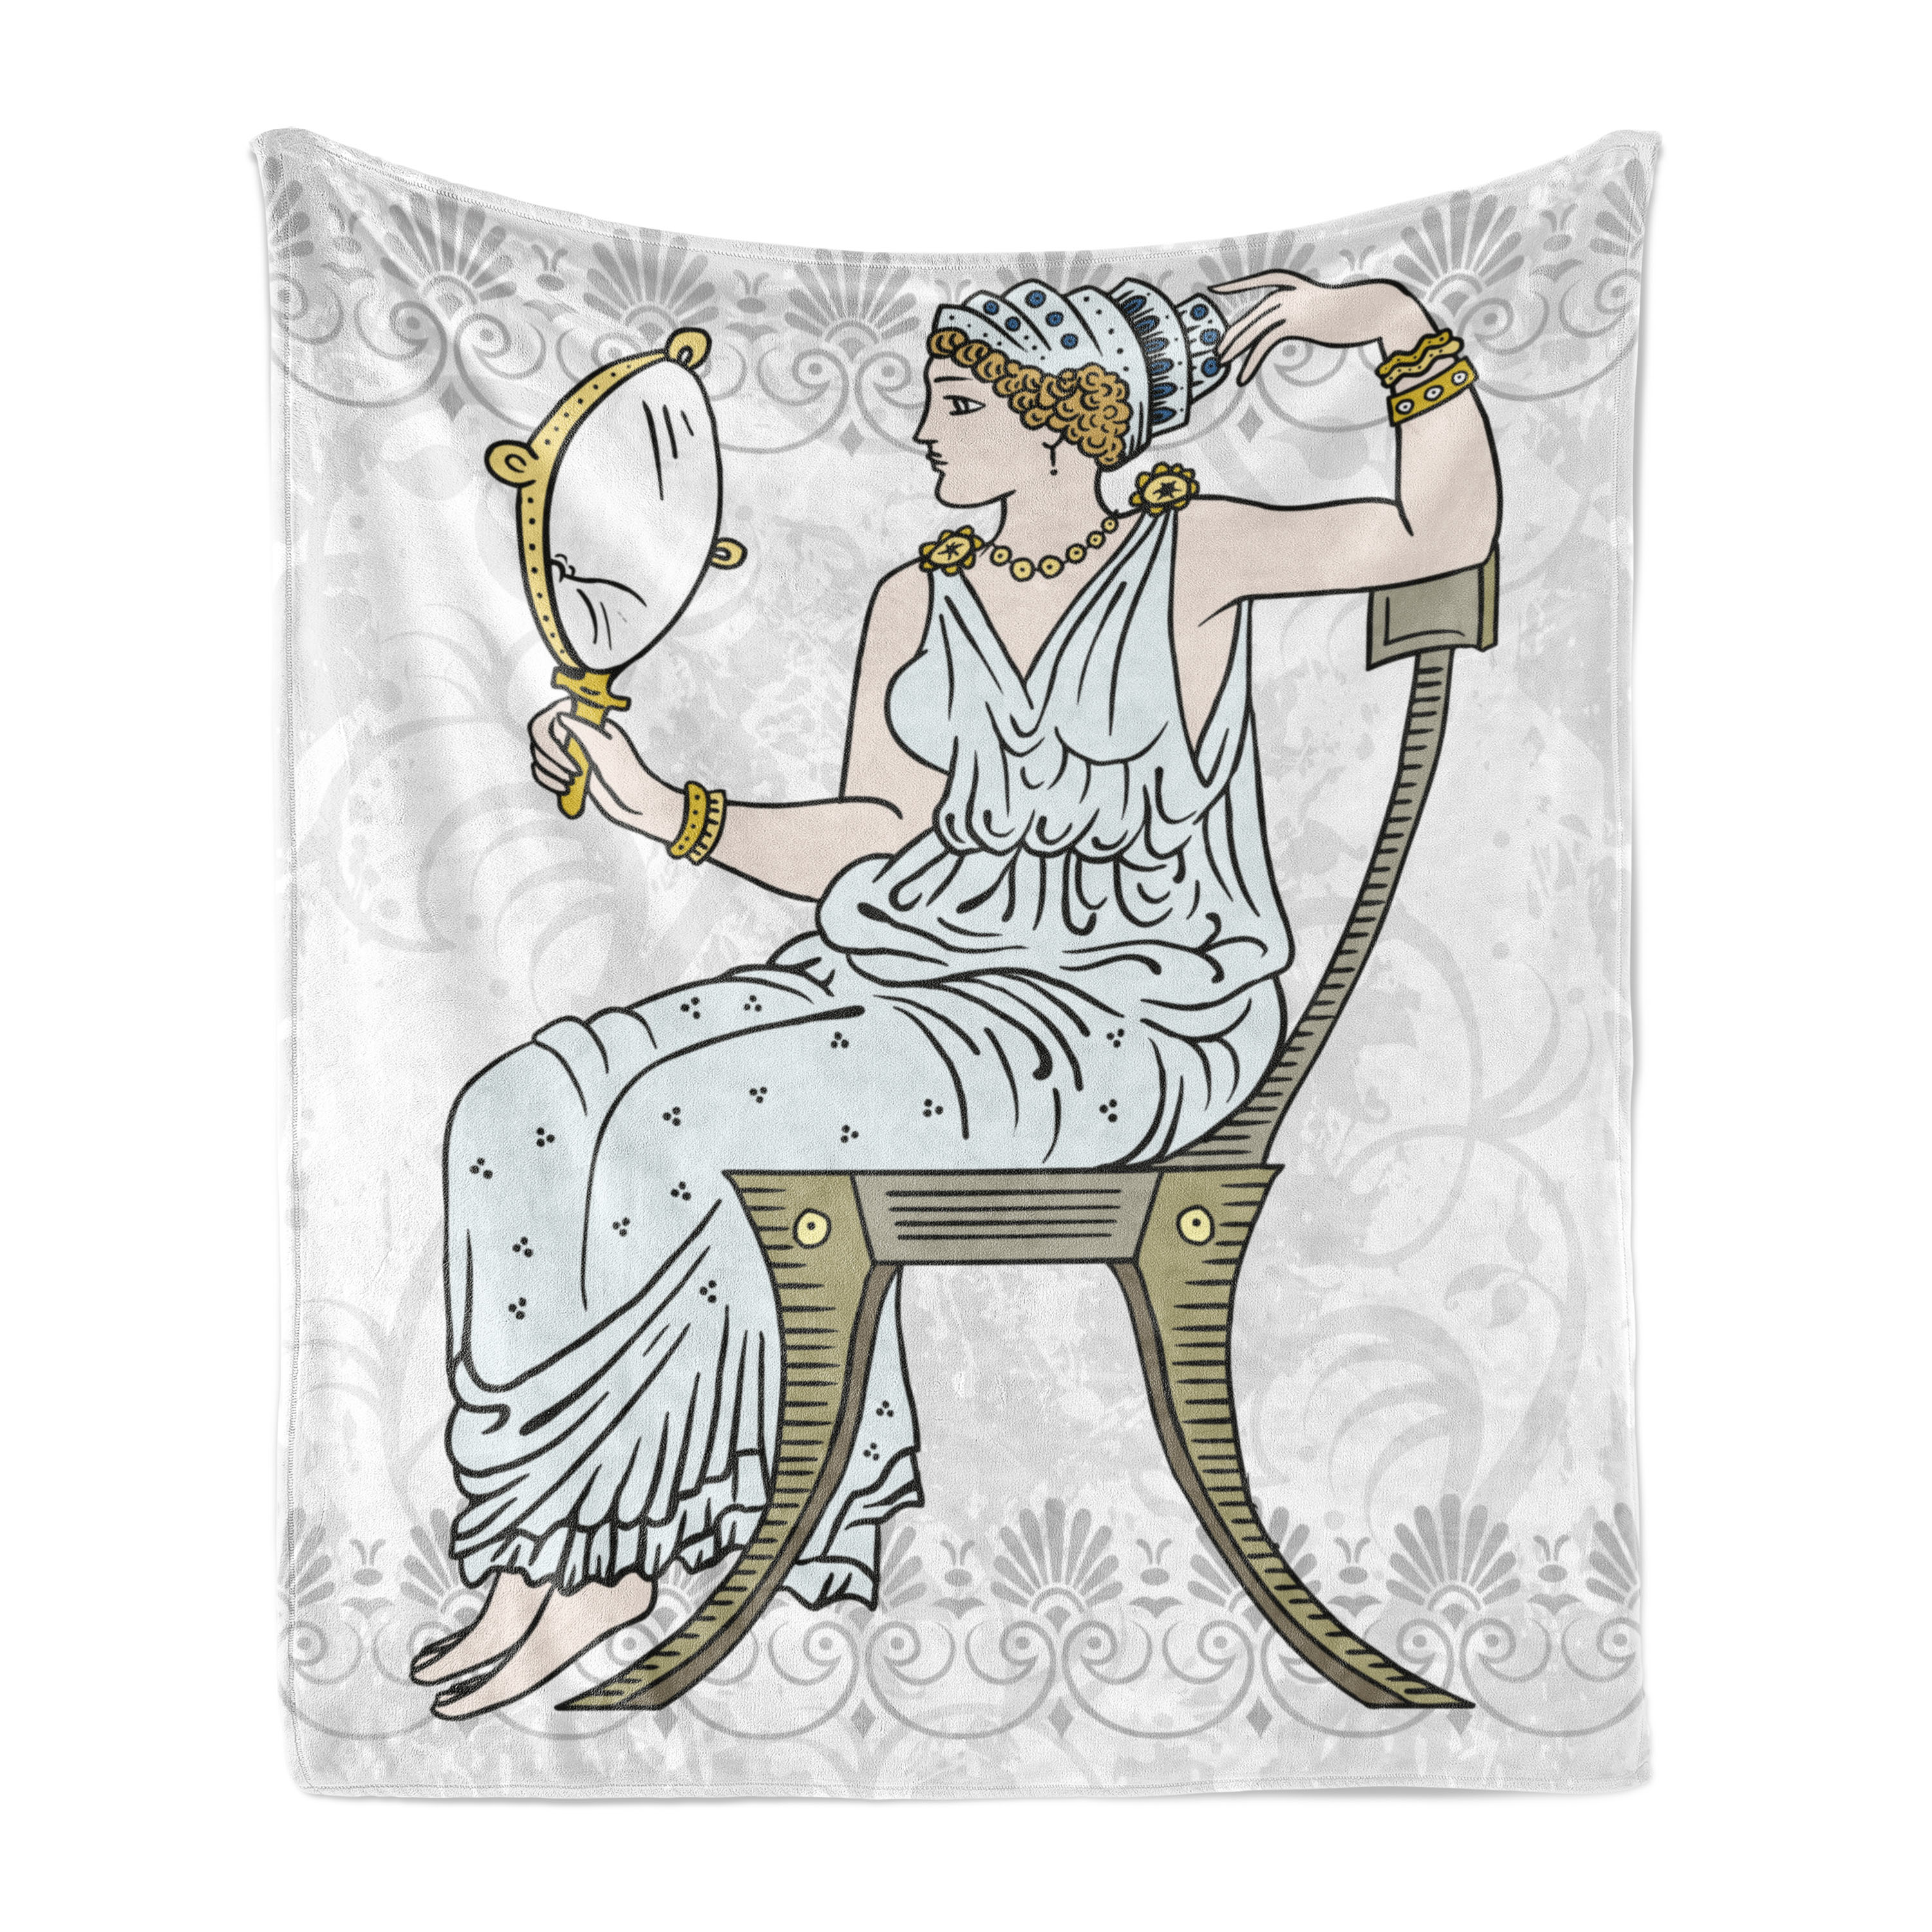 Venus Soft Flannel Fleece Blanket, Greek Woman Silhouette in Toga Sitting on a Chair Holding a Mirror Roman Illustration, Cozy Plush for Indoor and Outdoor Use, 70" x 90", Multicolor, by Ambesonne - image 1 of 5